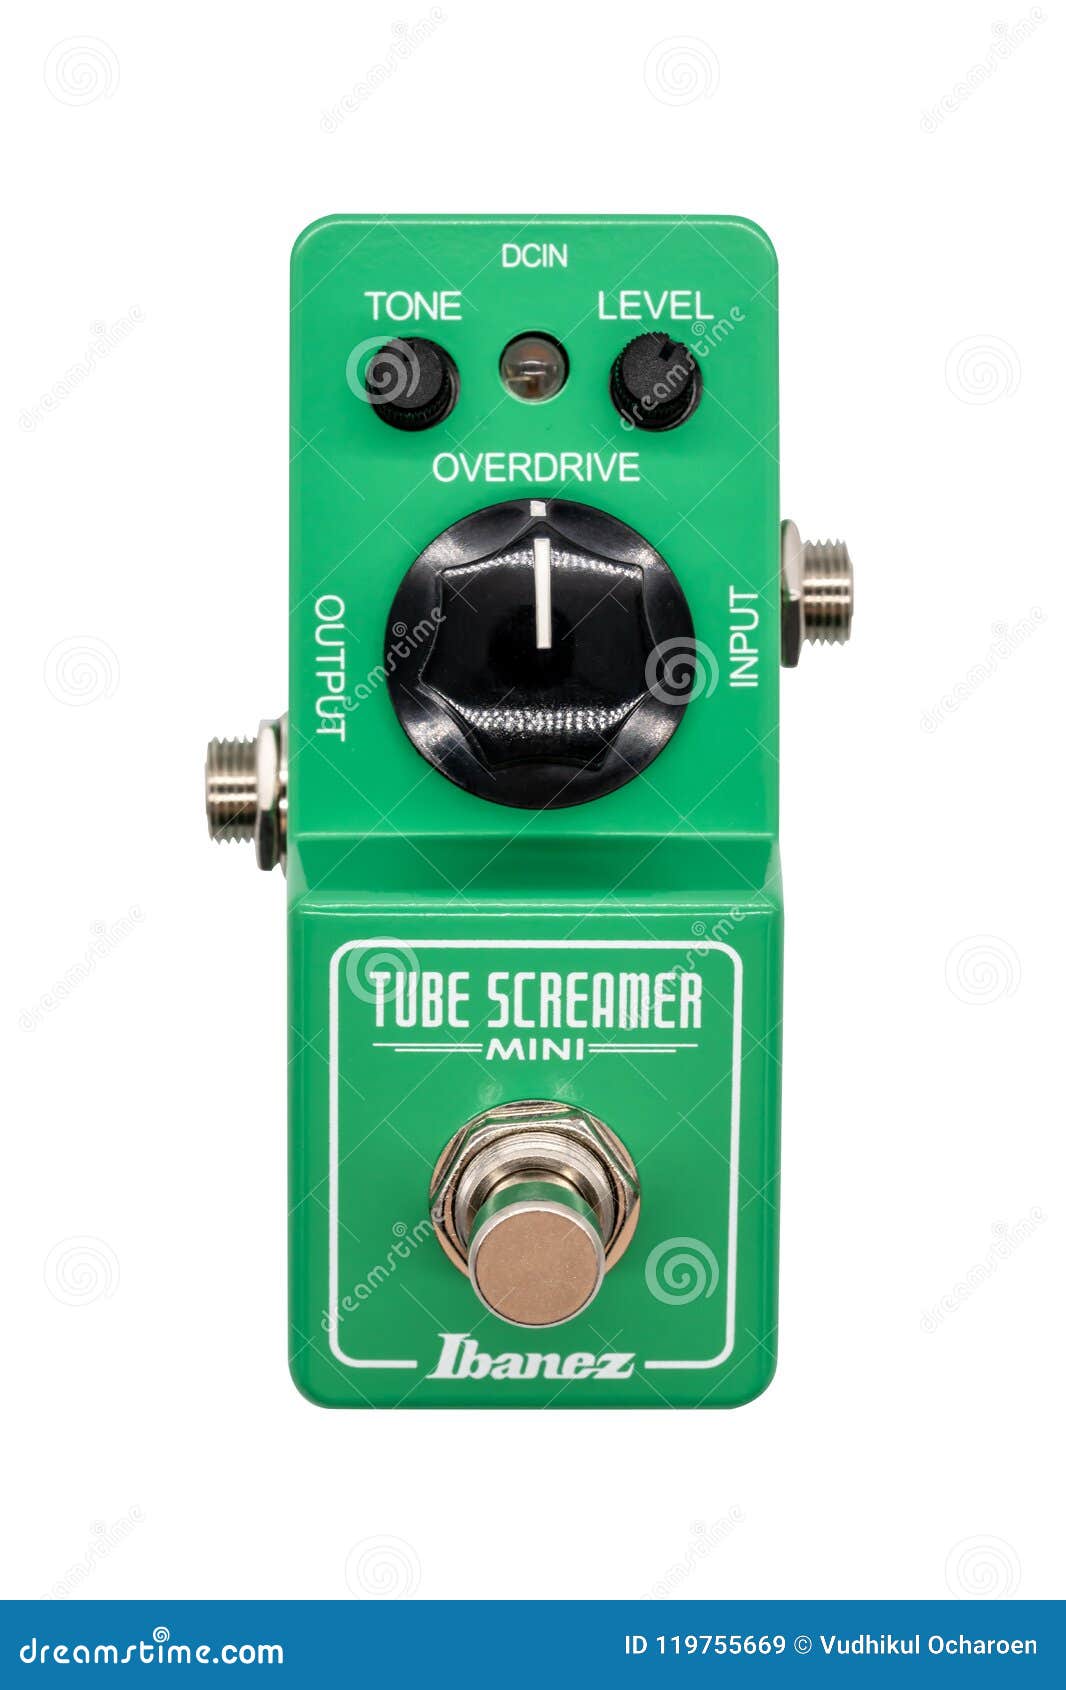 Ibanez Tube Screamer Mini. Overdrive Guitar Pedal Isolated on White  Background. Editorial Stock Image - Image of record, professional: 119755669